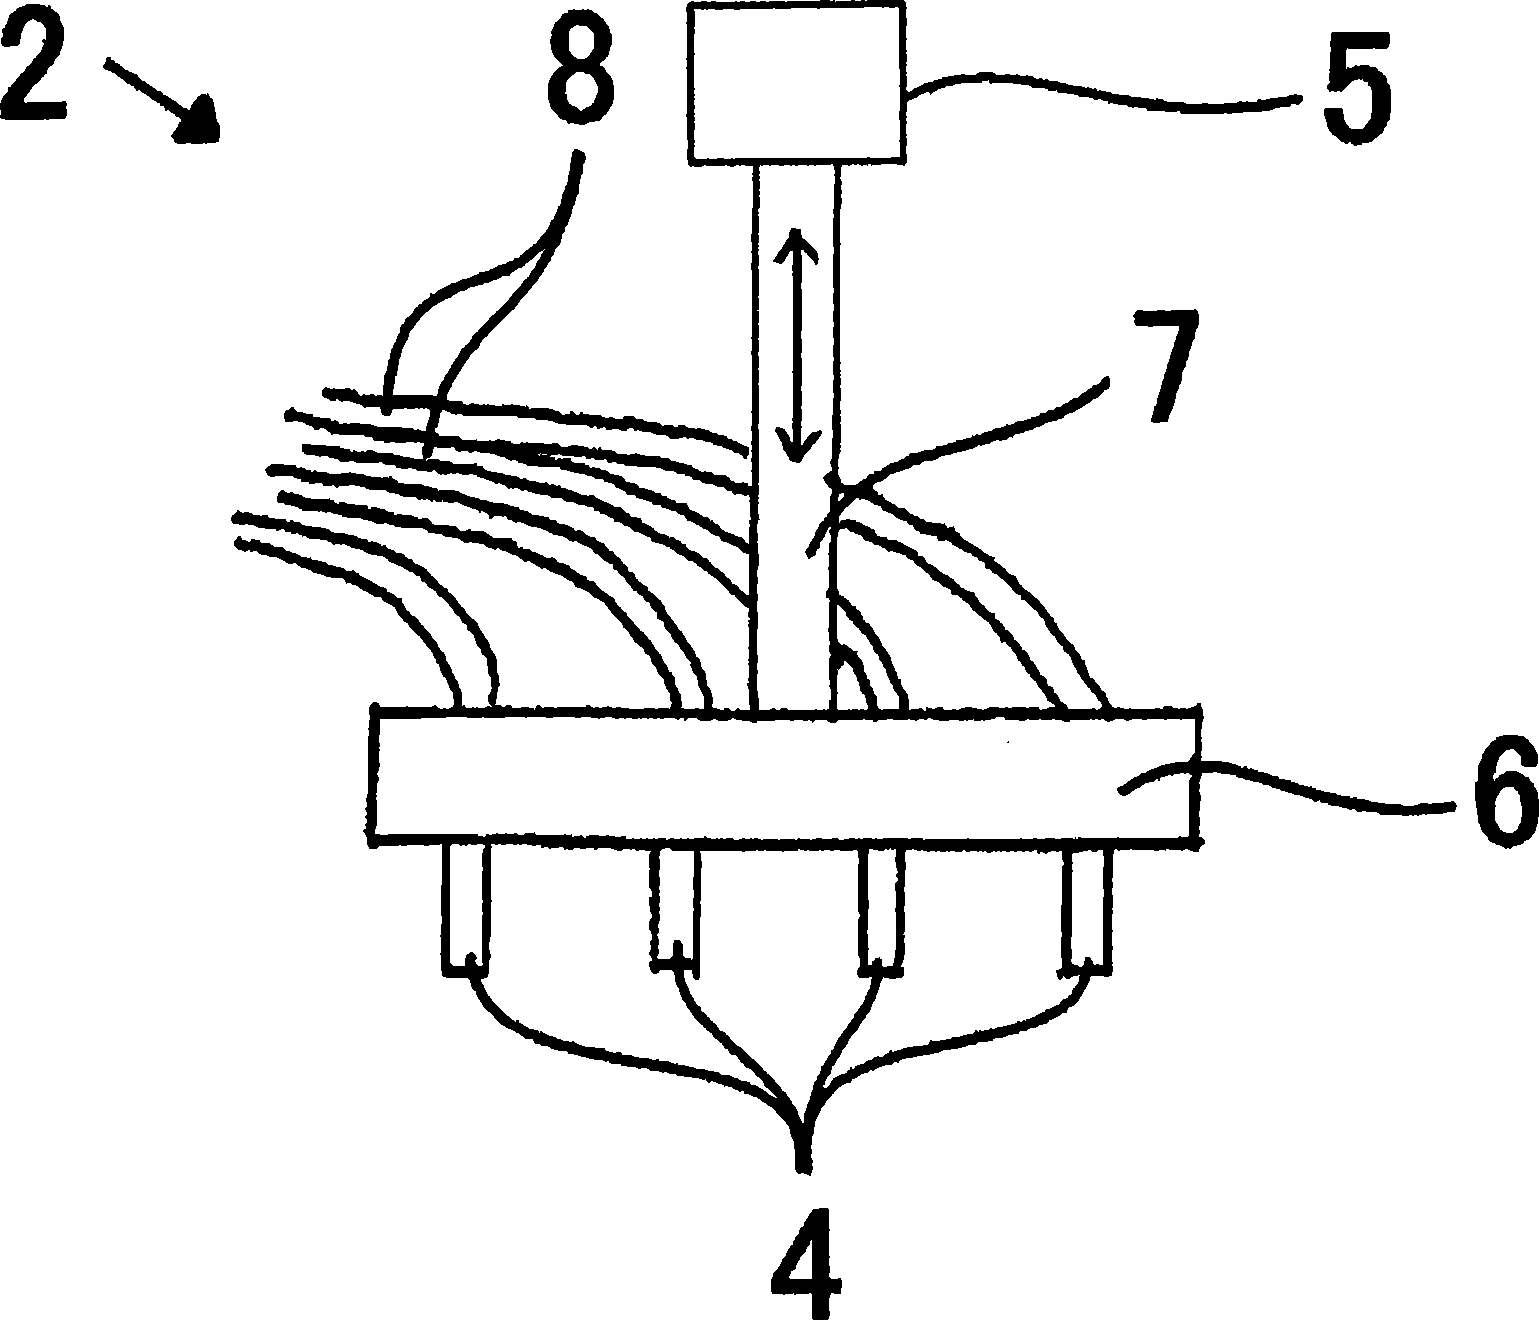 Dropping nozzle device, device for recovering dropping undiluted solution, device for supplying dropping undiluted solution, device for solidifying surface of droplet, device for circulating aqueous a